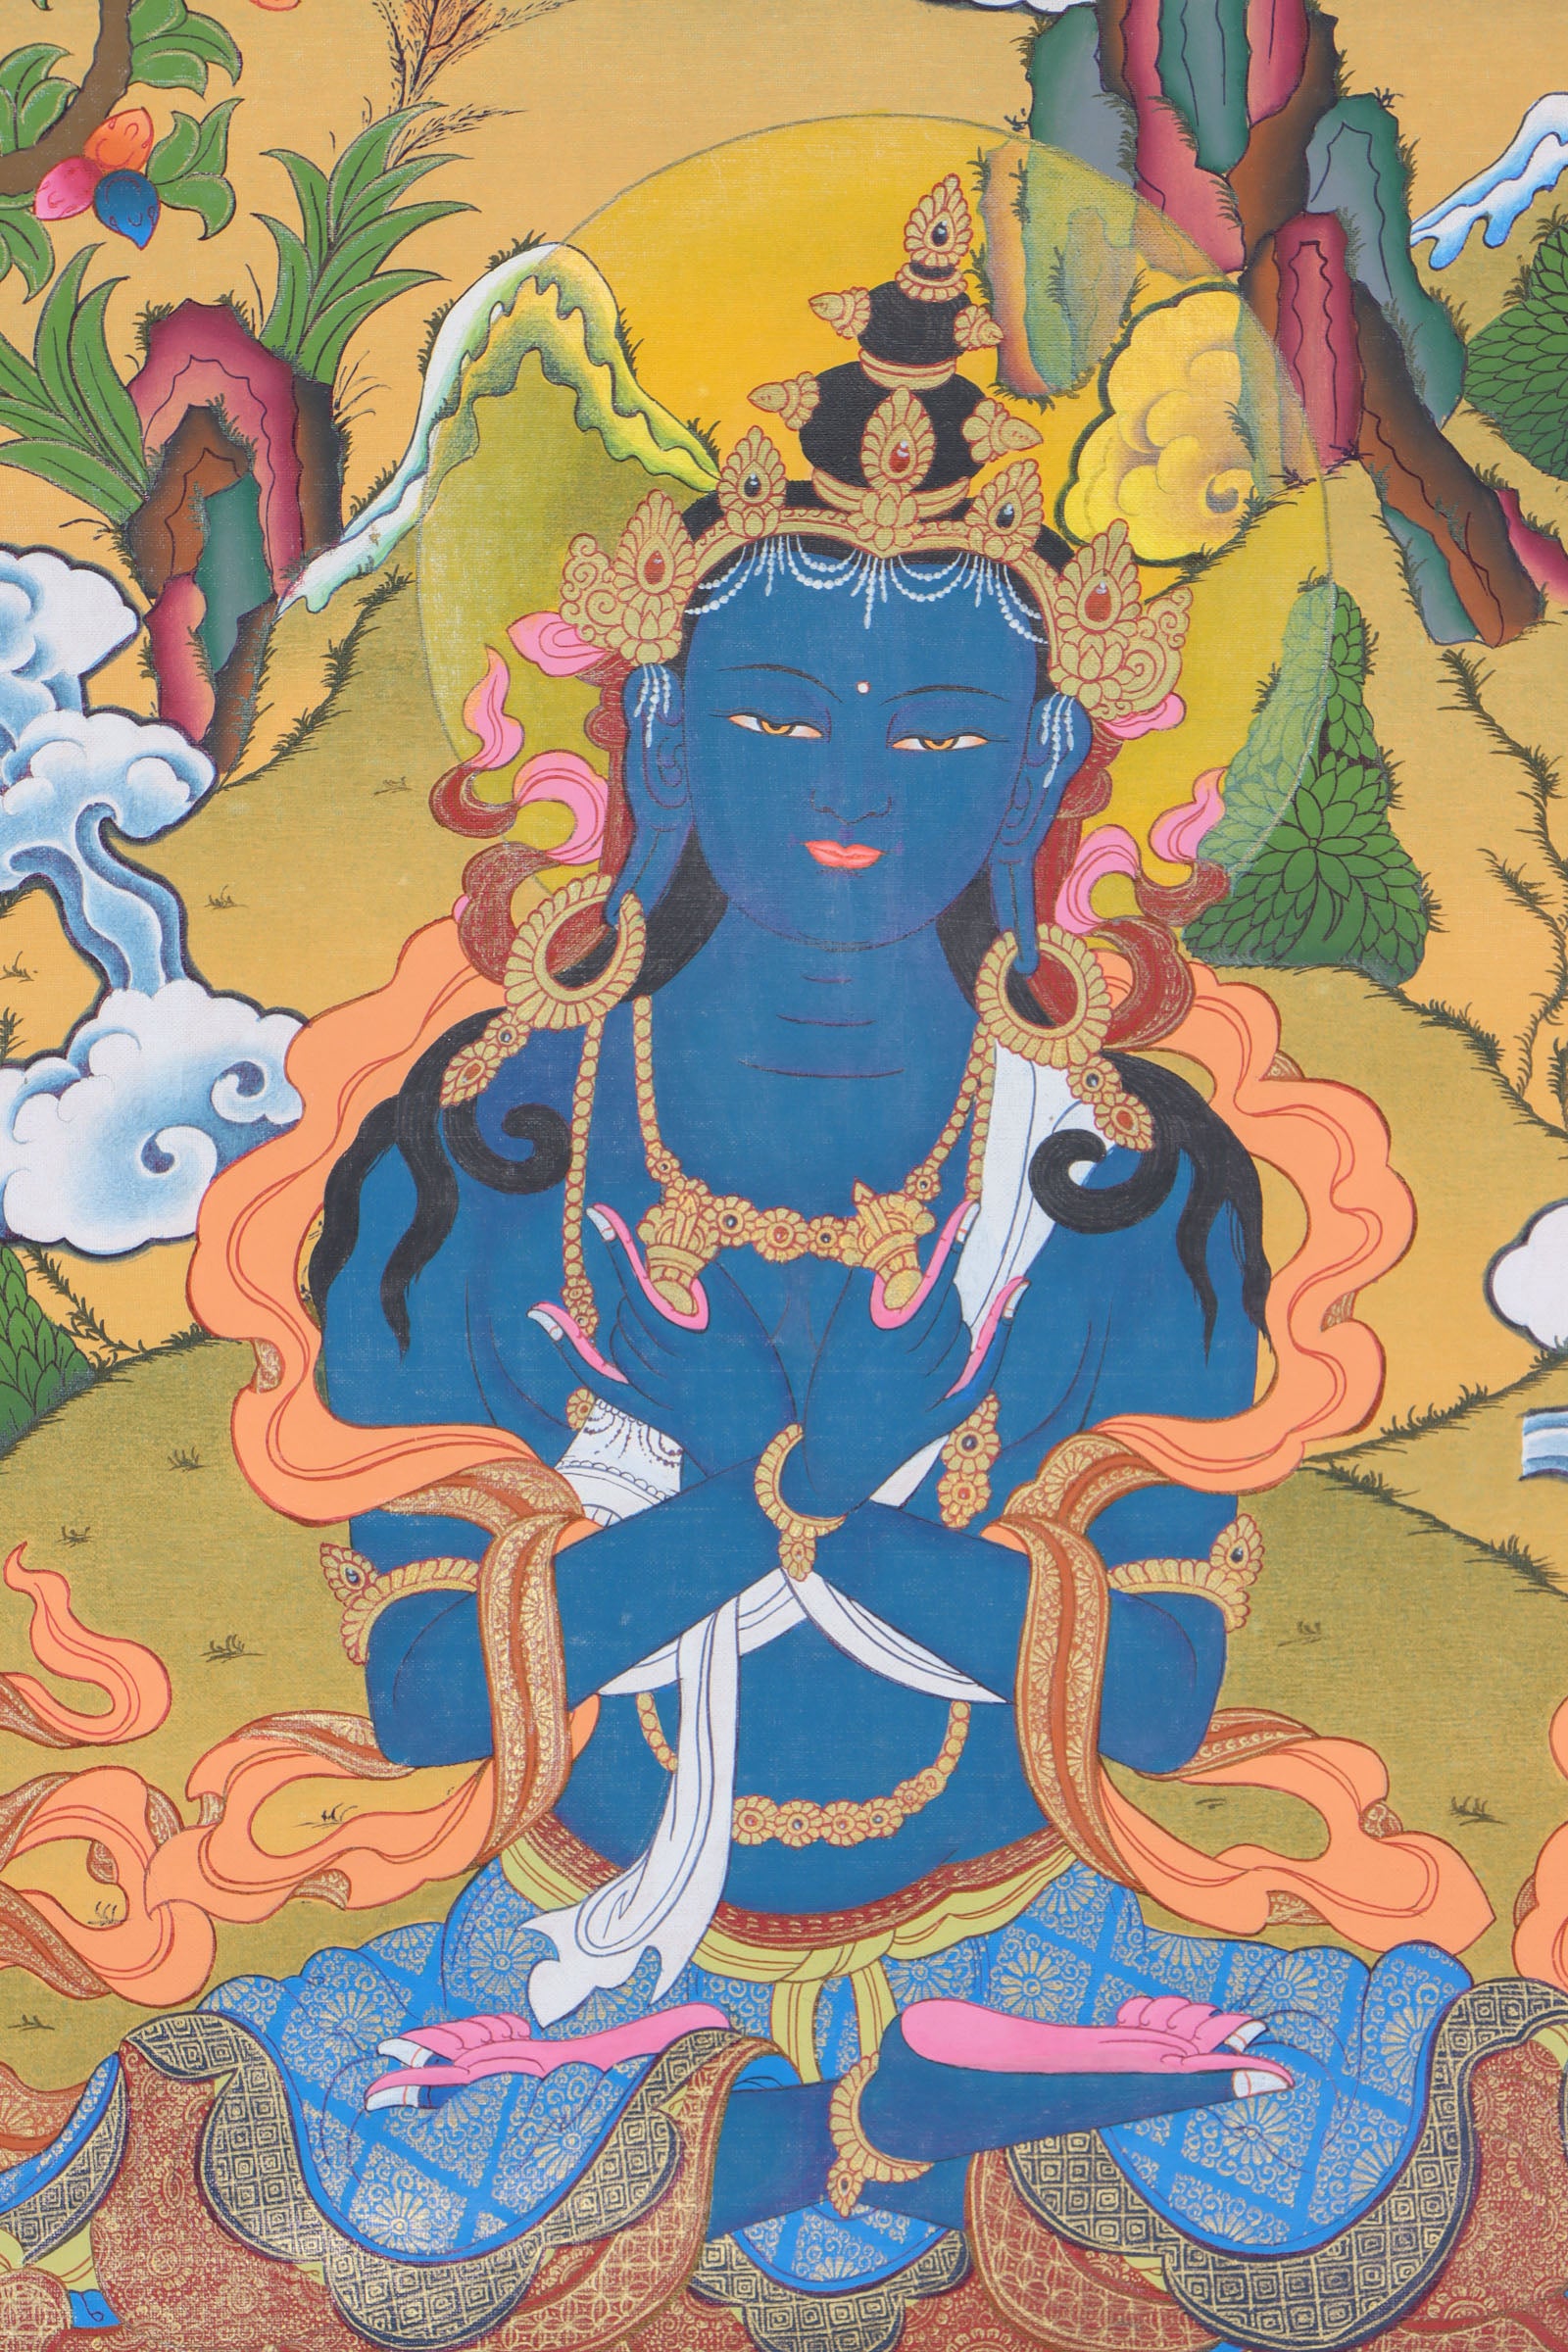 Bajradhara Thangka for wisdom in the path to enlightenment.